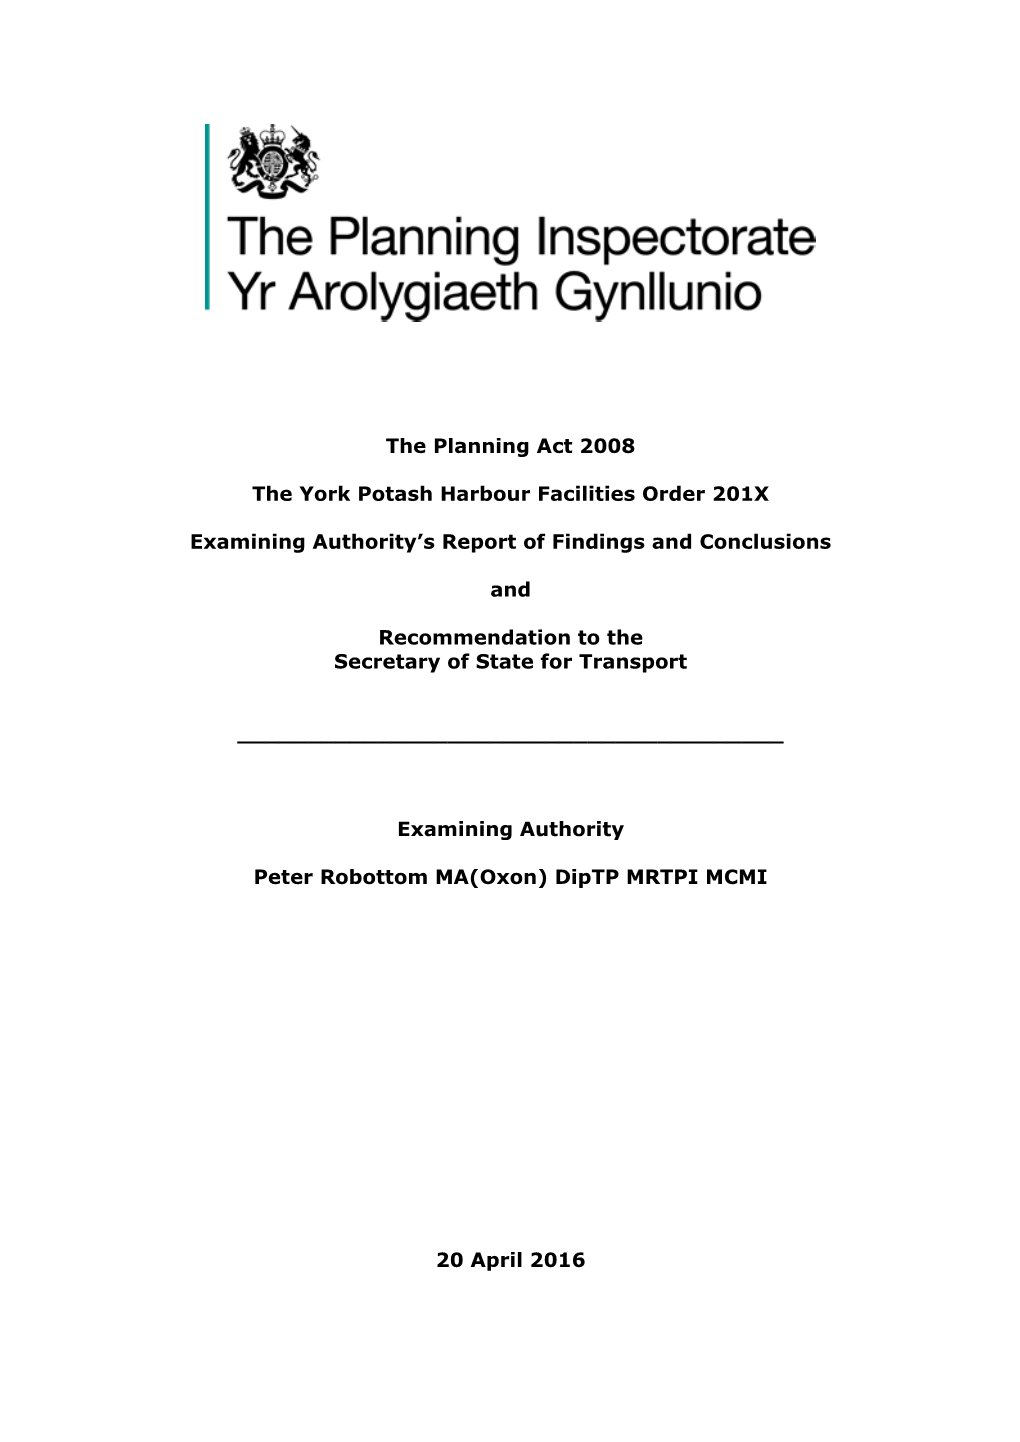 The Planning Act 2008 the York Potash Harbour Facilities Order